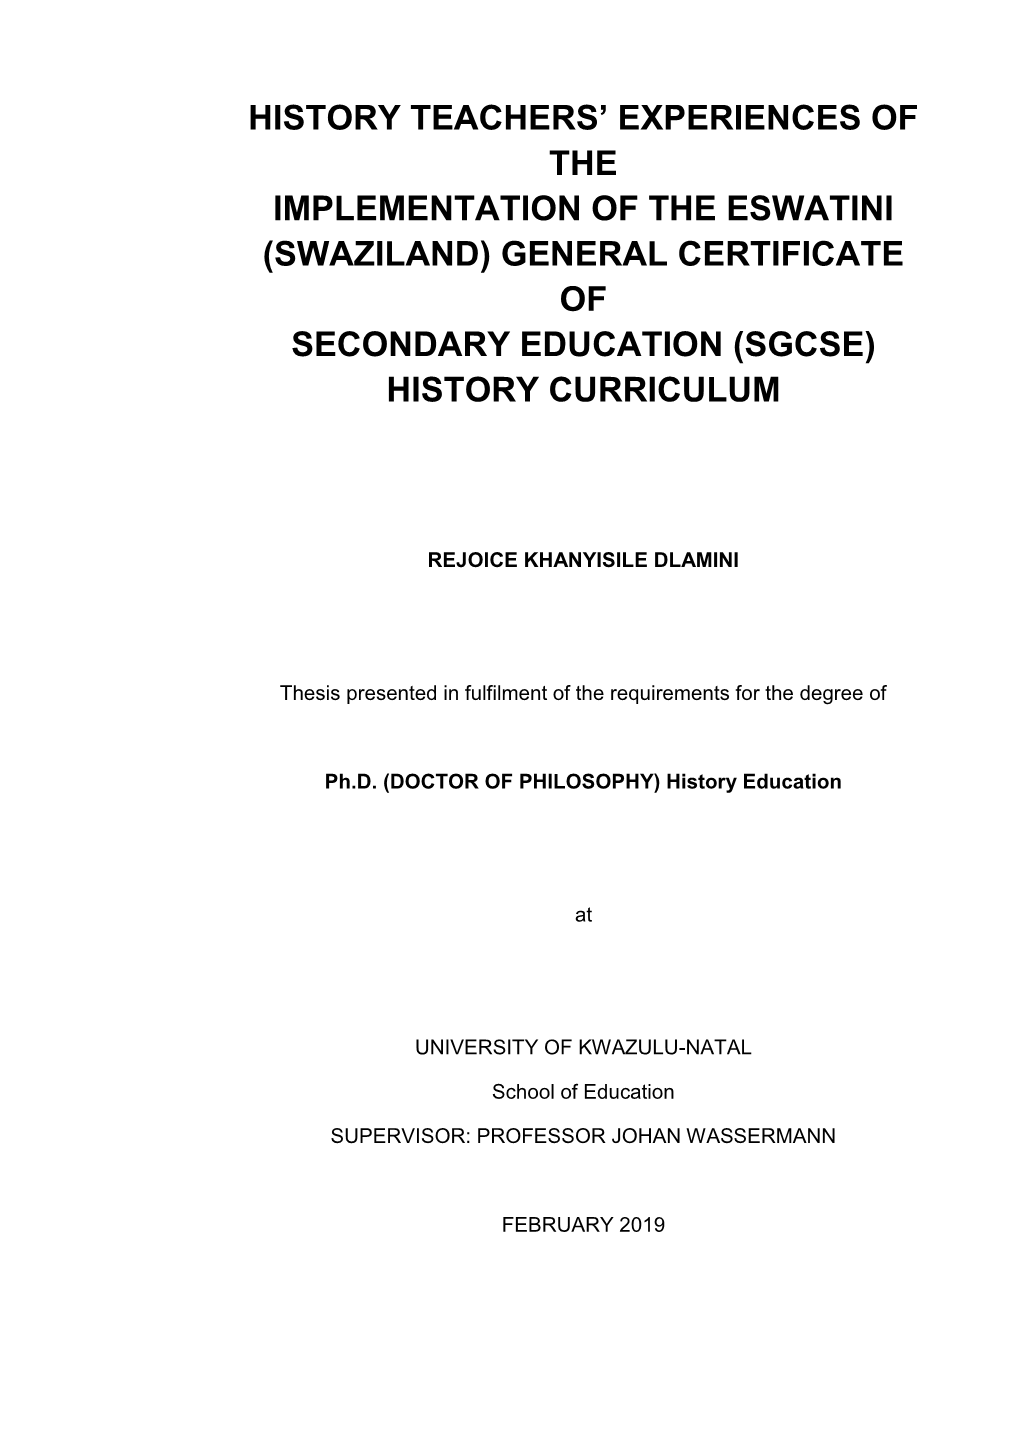 Swaziland) General Certificate of Secondary Education (Sgcse) History Curriculum